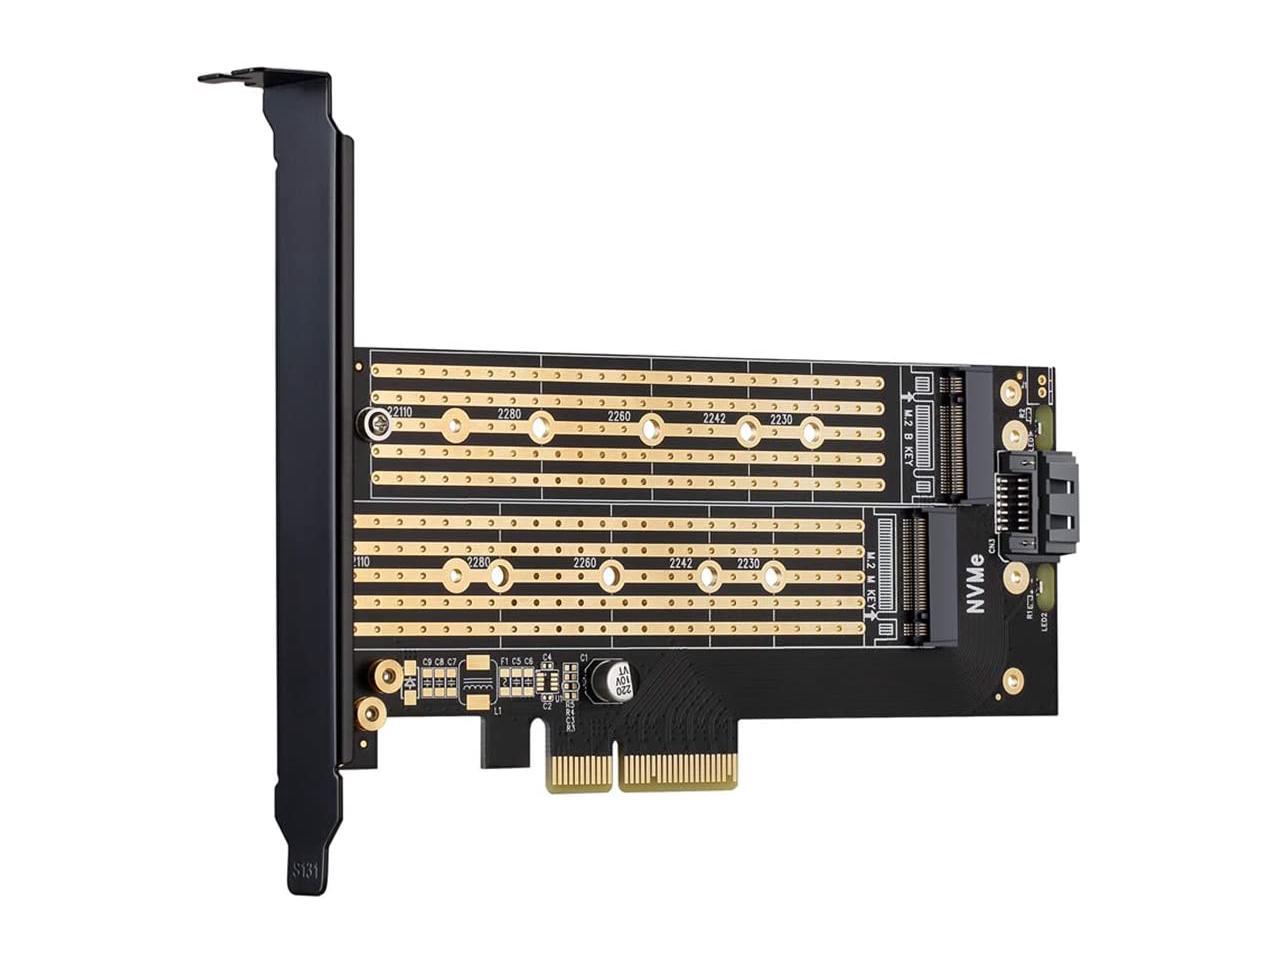 2280mm SATA to M2 NGFF SSD Adapter Card Support 2230mm 2242mm 2260mm 